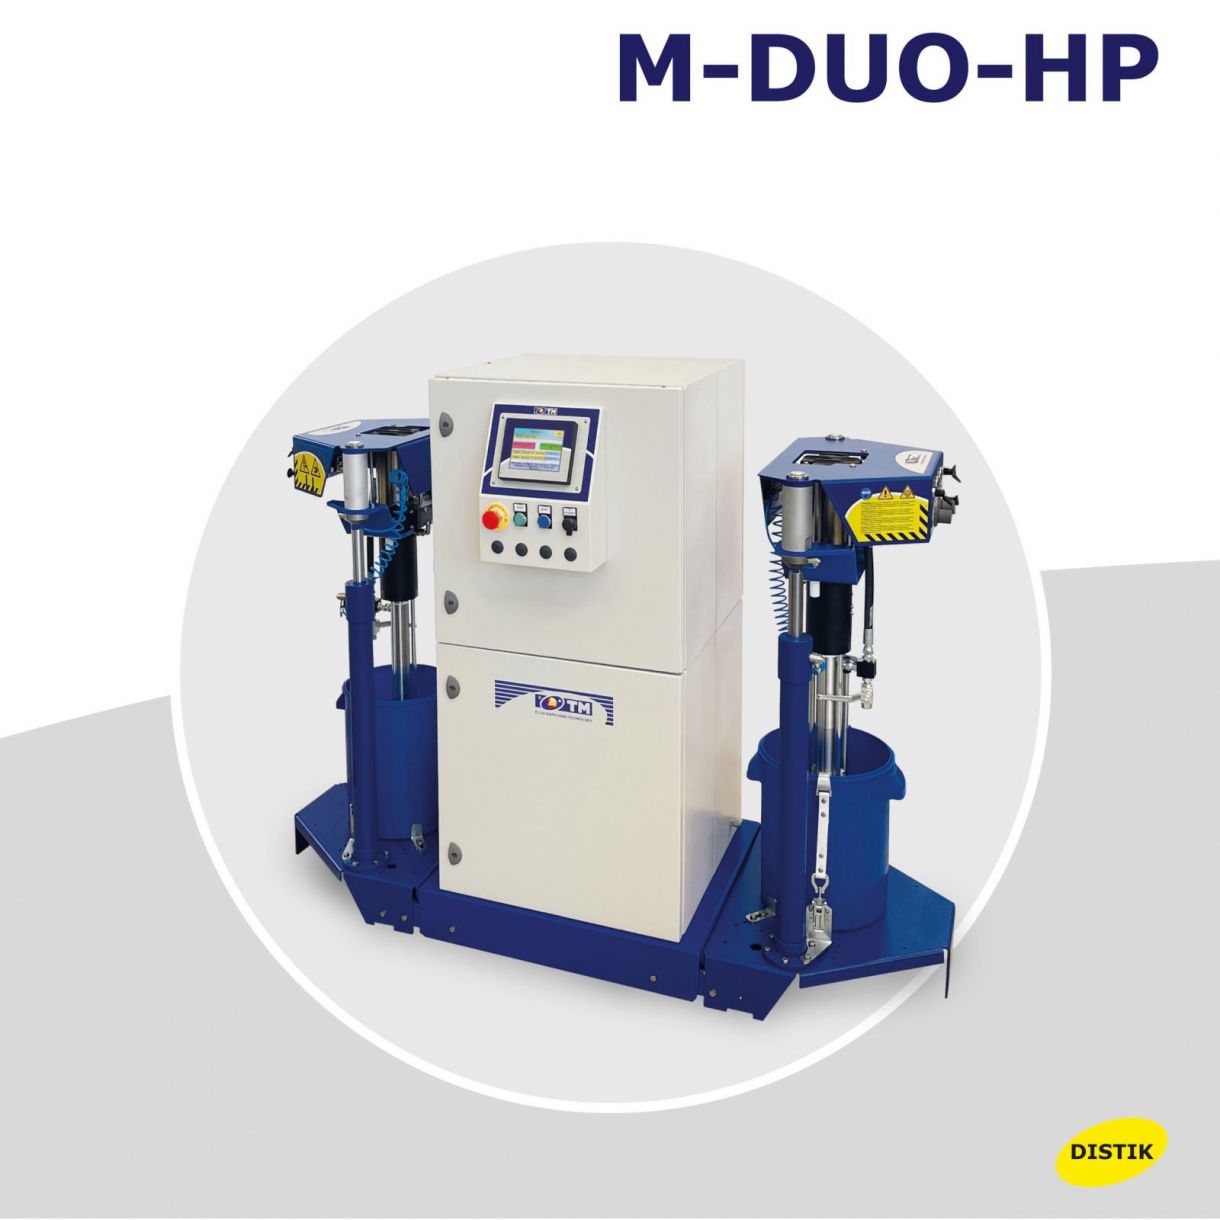 HIGH PRESSURE CASTING MACHINES FOR 2K RESINS (M-DUO-HP)